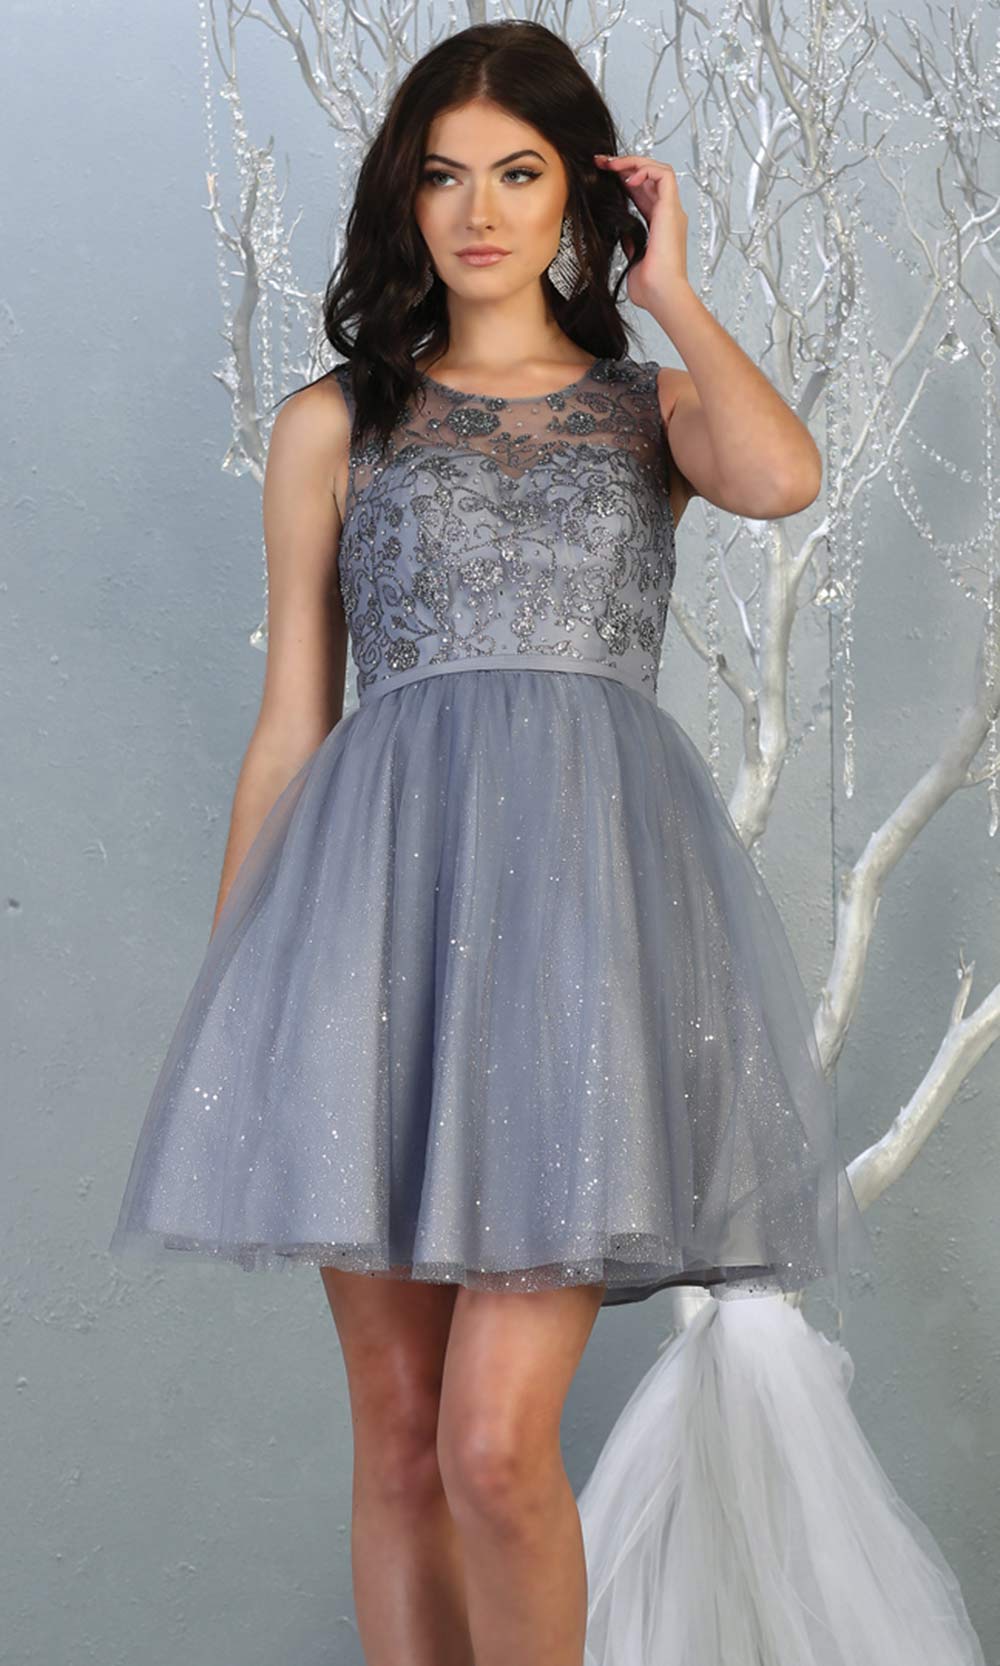 Mayqueen MQ1803 short dusty blue sequin flowy high neck grade 8 graduation dress w/puffy skirt. Dusty blue party dress is perfect for prom, graduation, grade 8 grad, confirmation dress, bat mitzvah dress, damas. Plus sizes avail for grad dress.jpggrade 8 grad dresses, graduation dresses